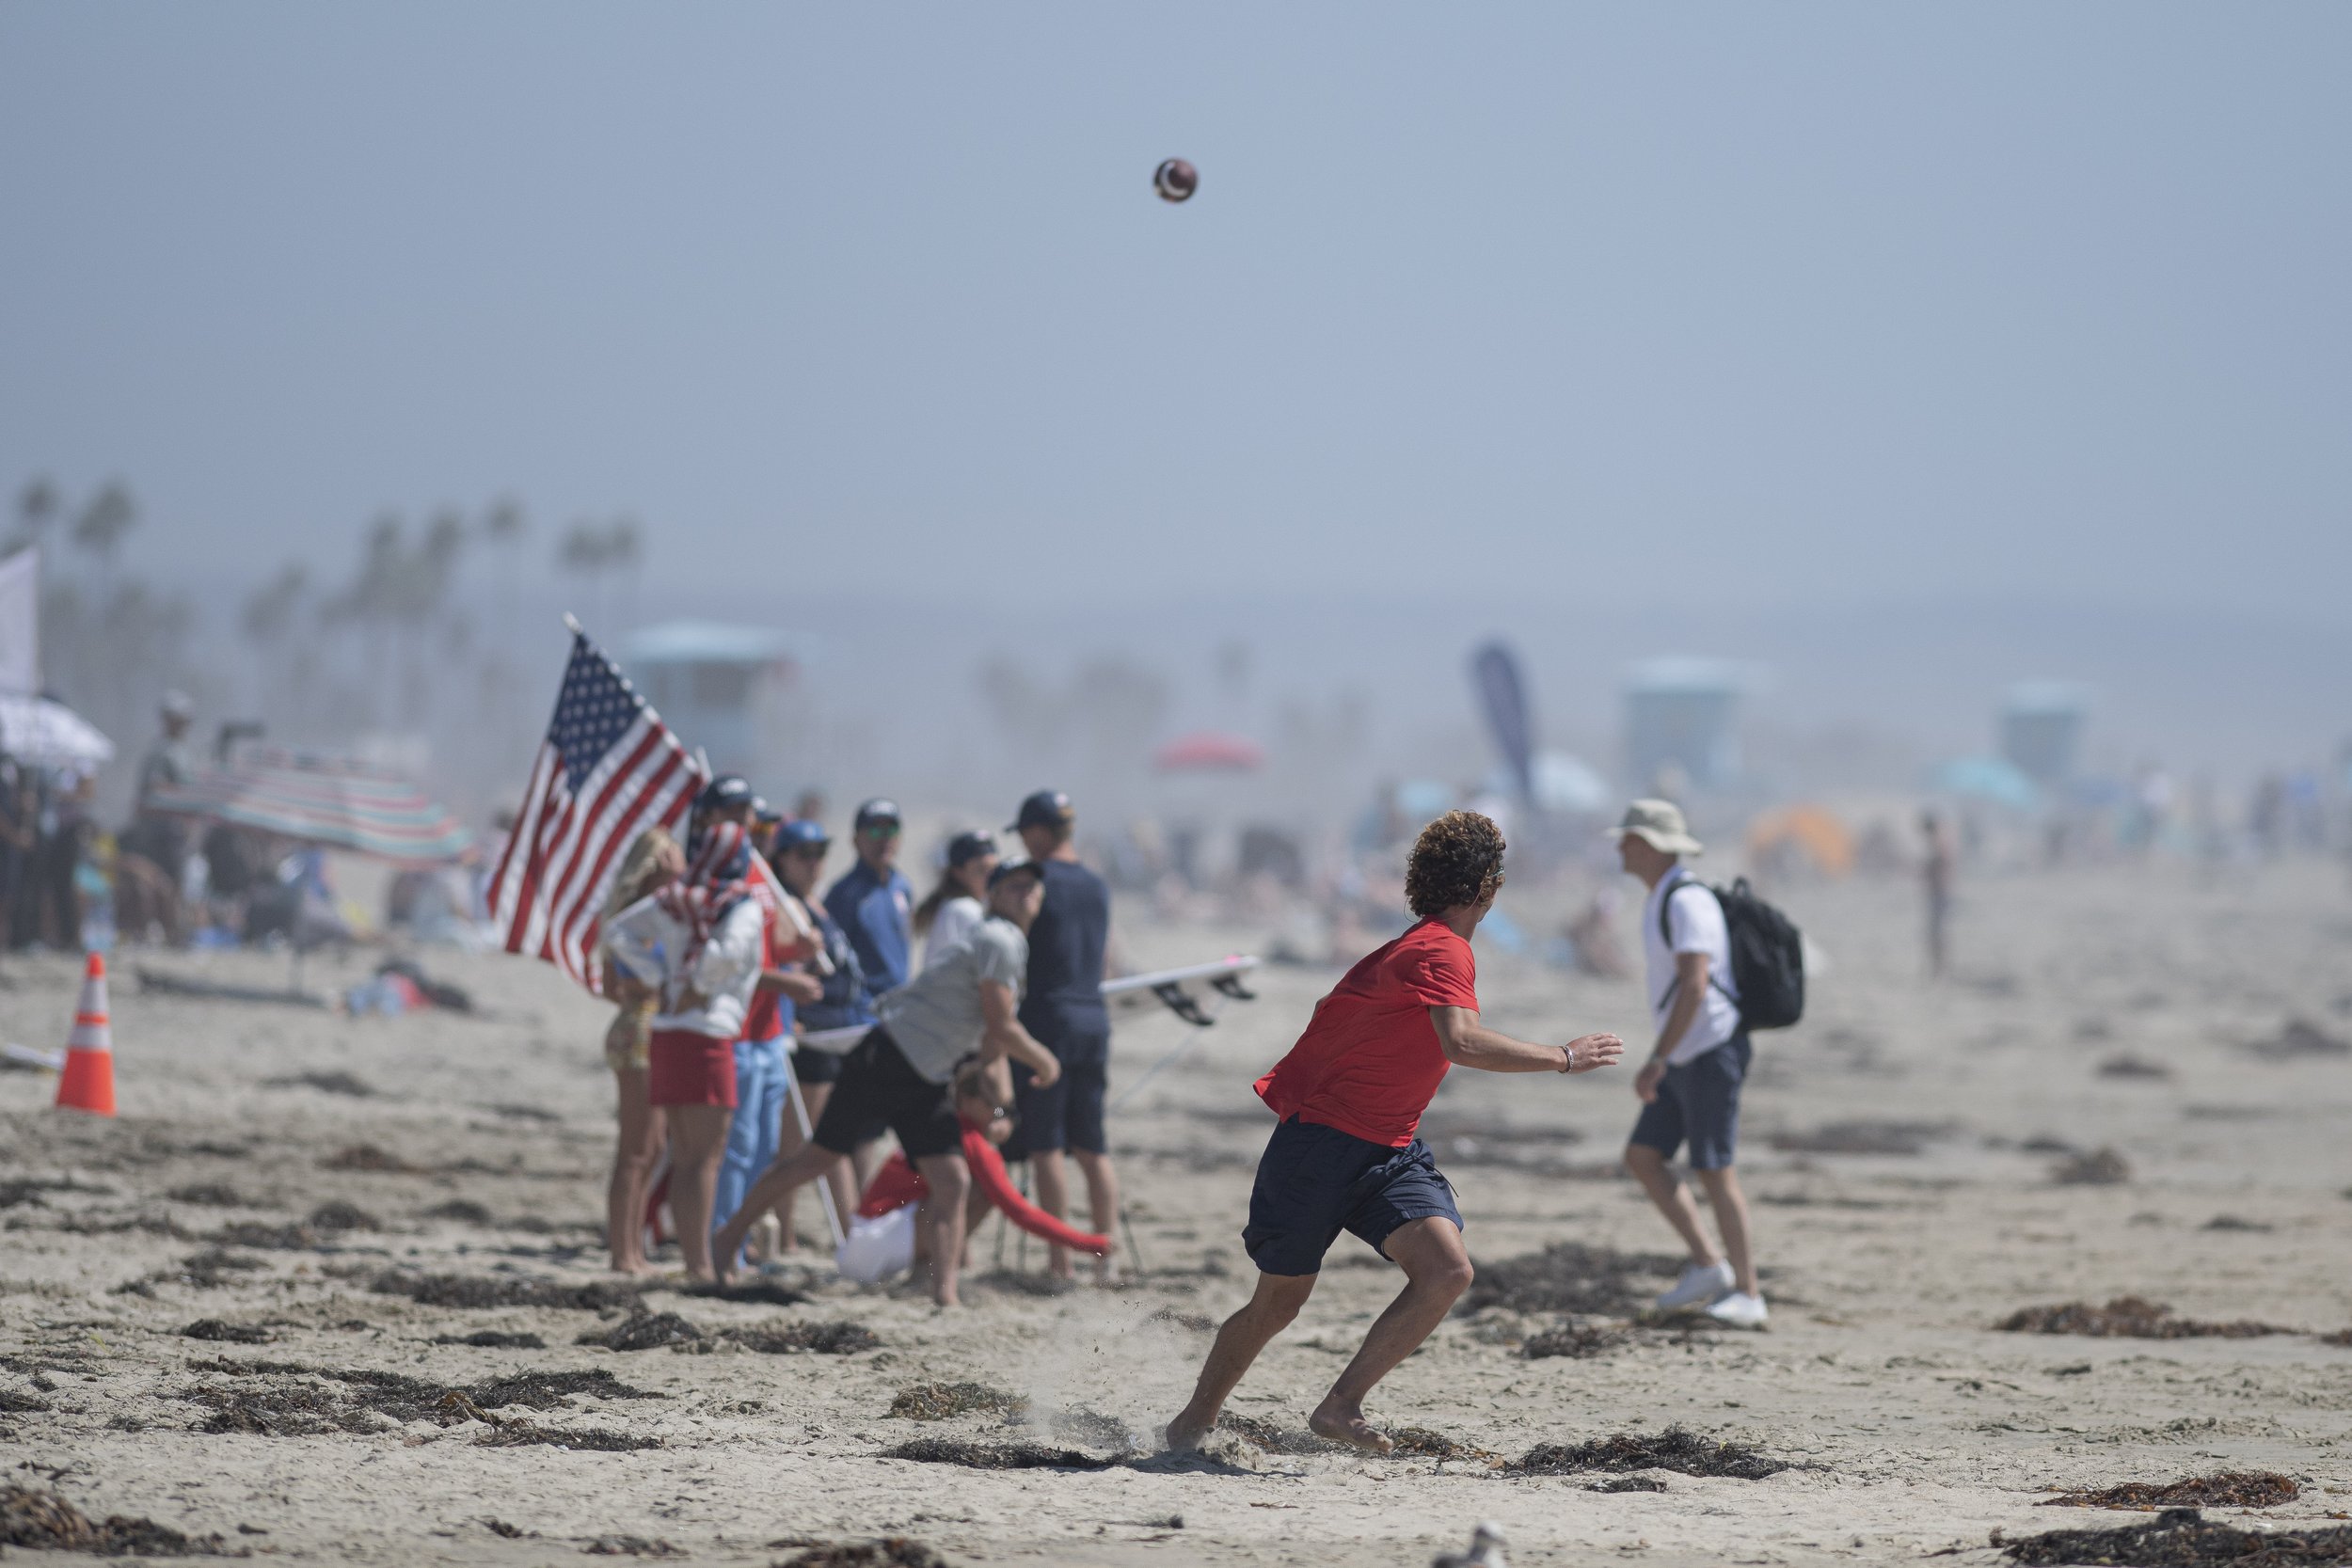  Members from team USA throw a football on the beach between their heats at the ISA World Surfing Games. (Jon Putman | The Corsair) 